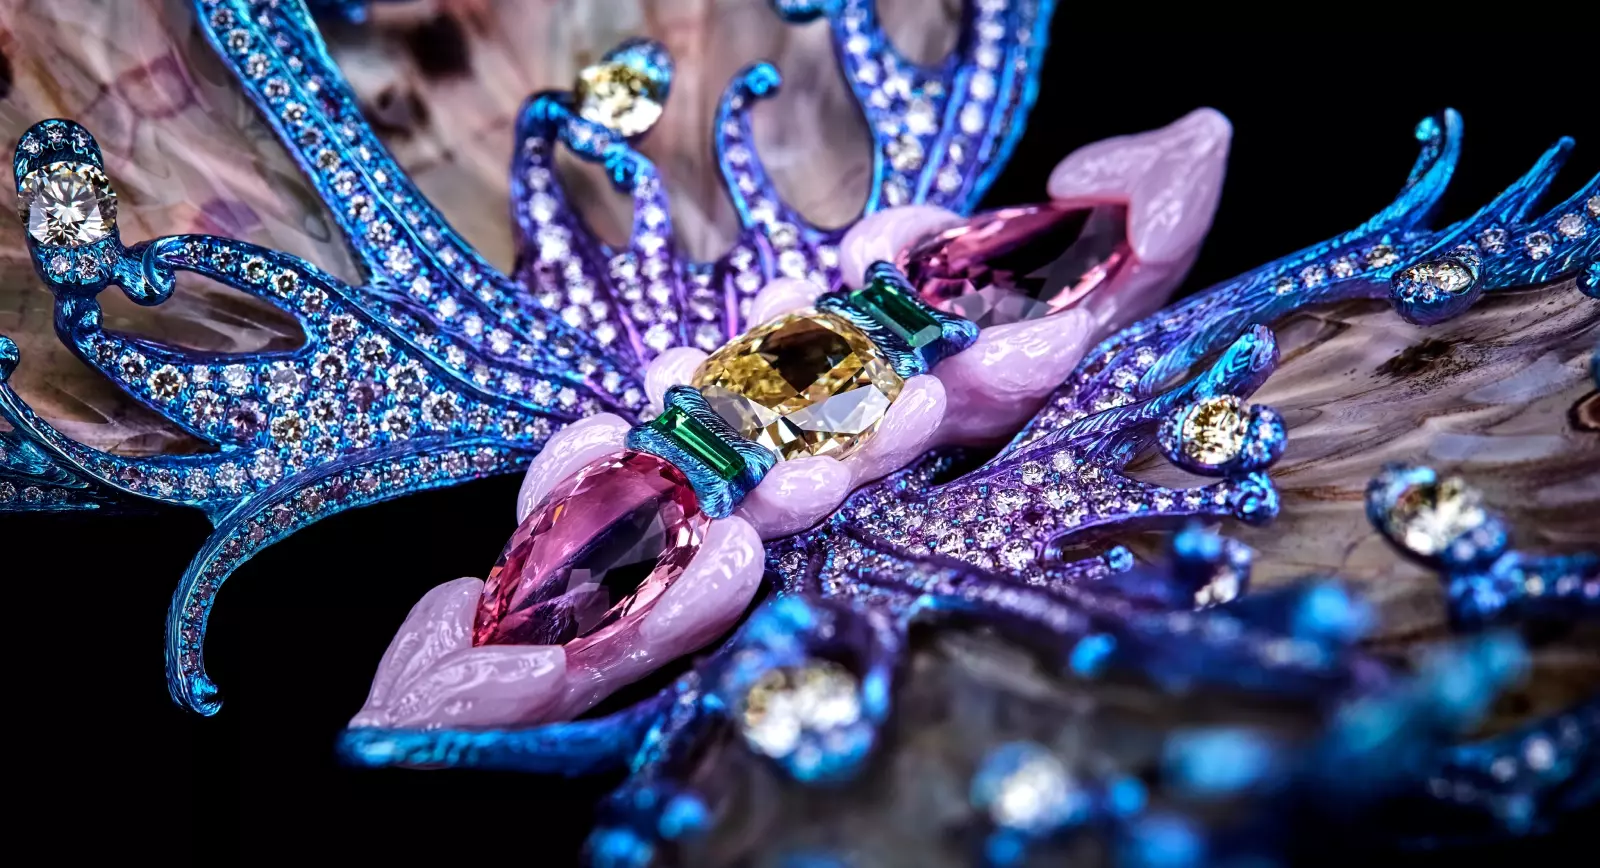 Wallace Chan Forever Dancing – Wind’s Tale brooch with yellow diamond, morganite, tsavorites, crystal, mother of pearl, fancy-colour diamonds, sapphires and real butterfly specimen in The Wallace Chan Porcelain and titanium